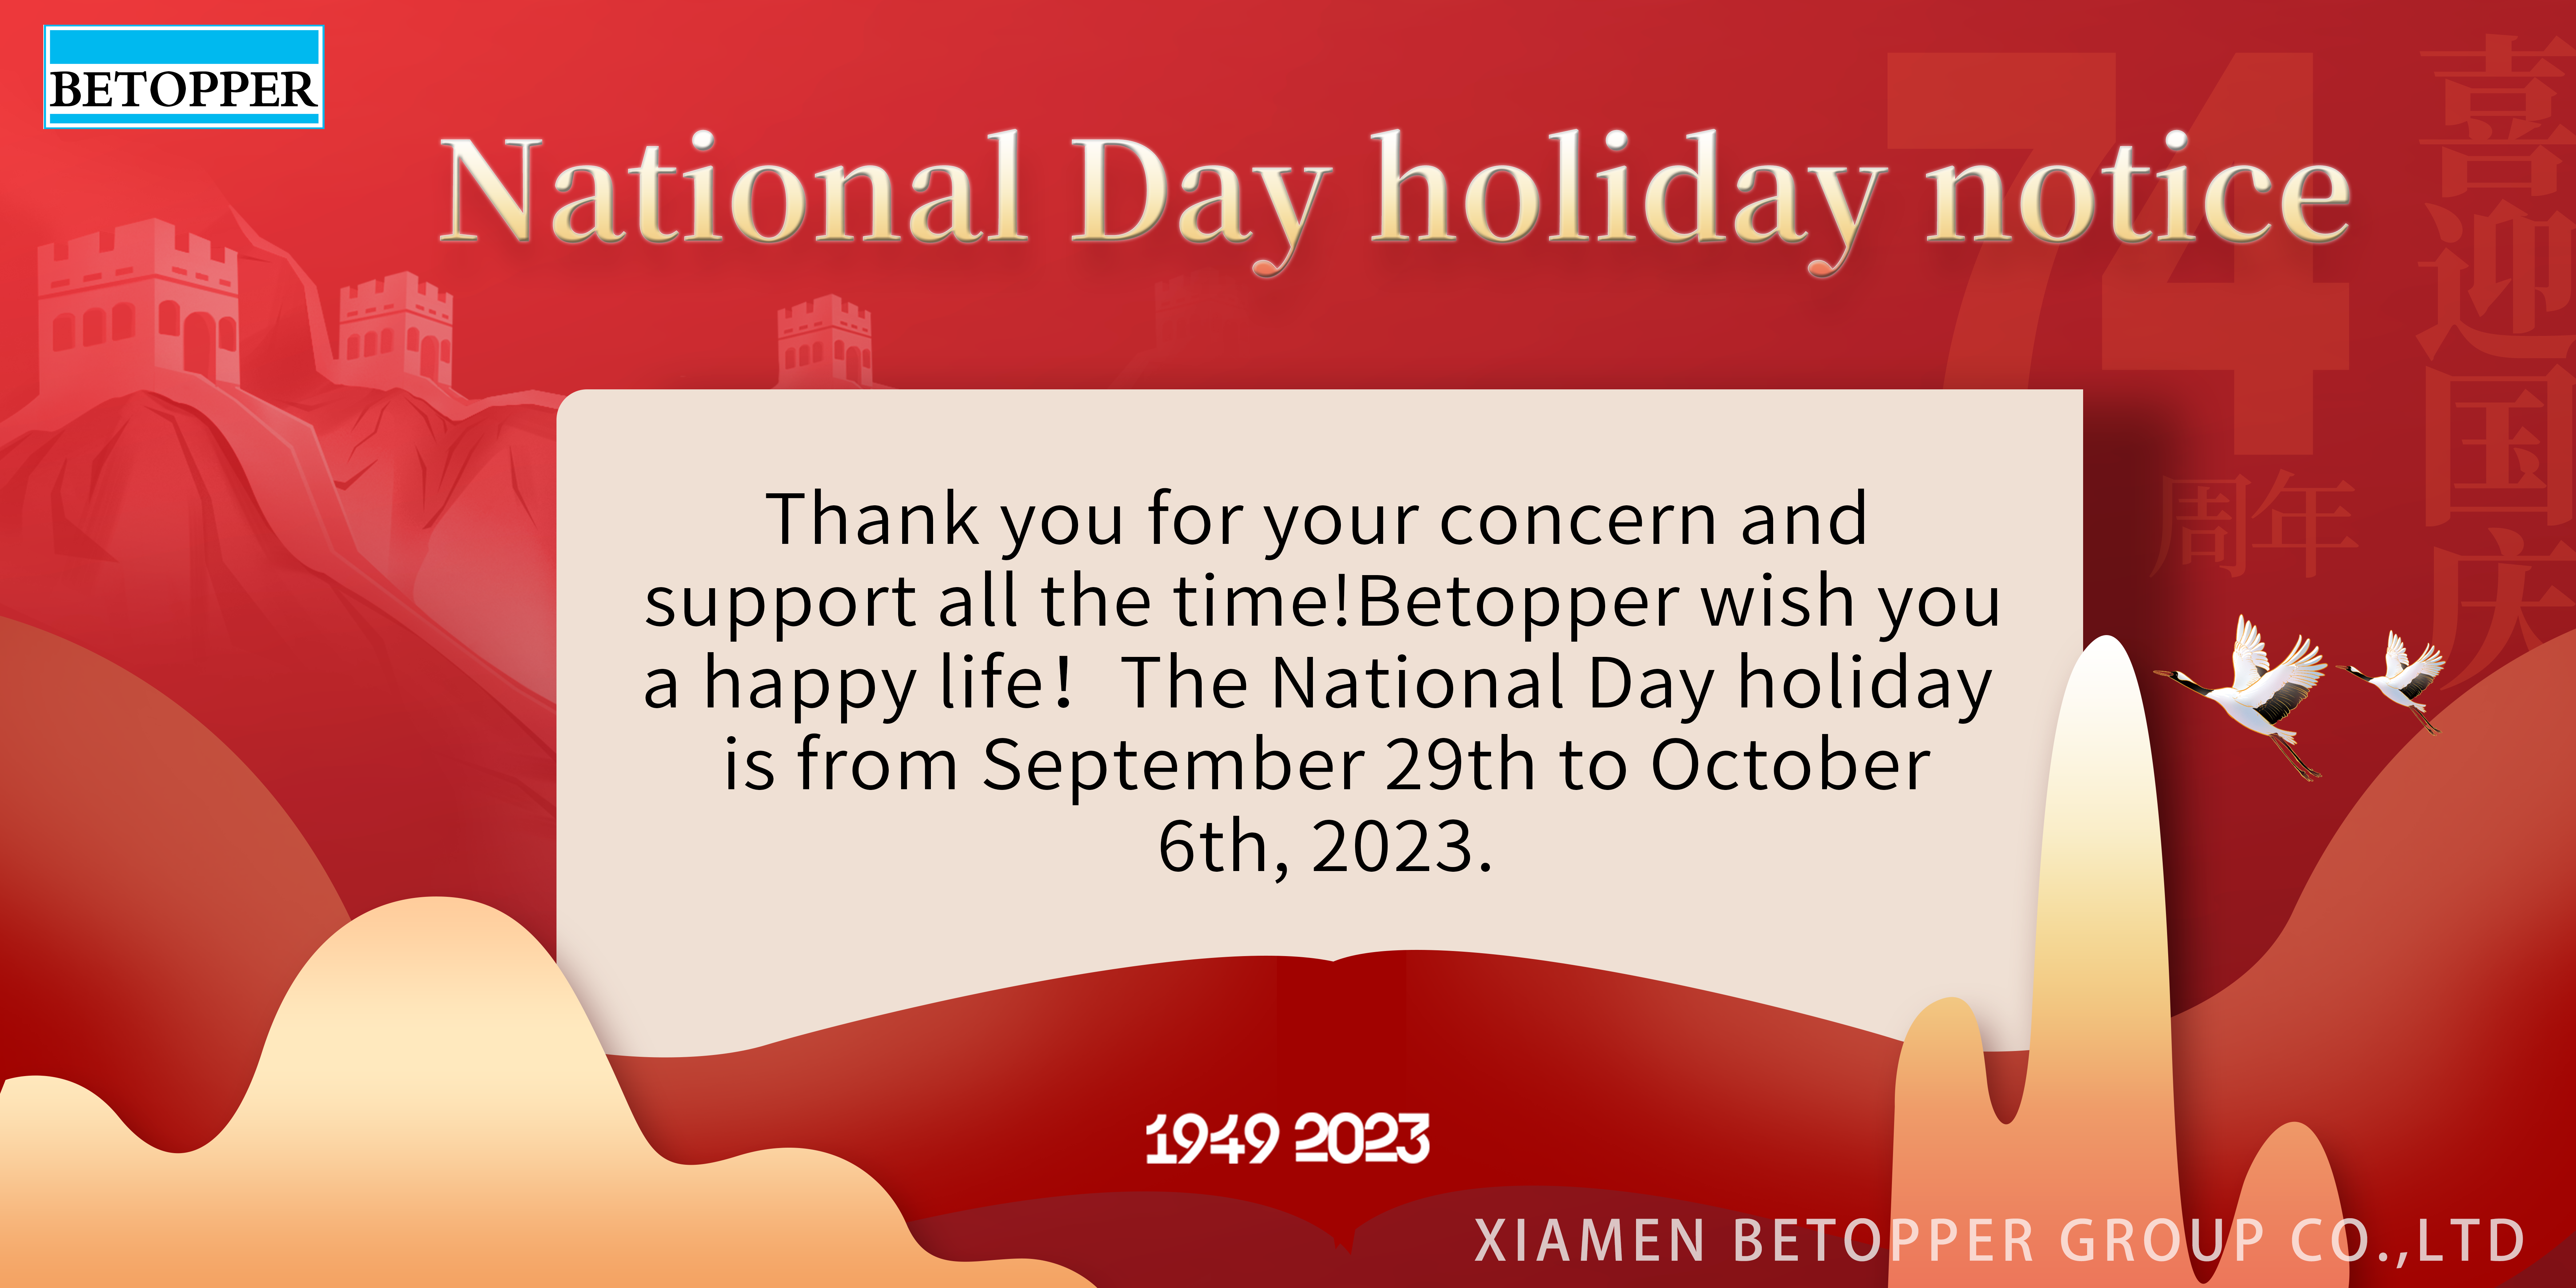 Betopper Group Mid-Autumn National Day Holiday Notice